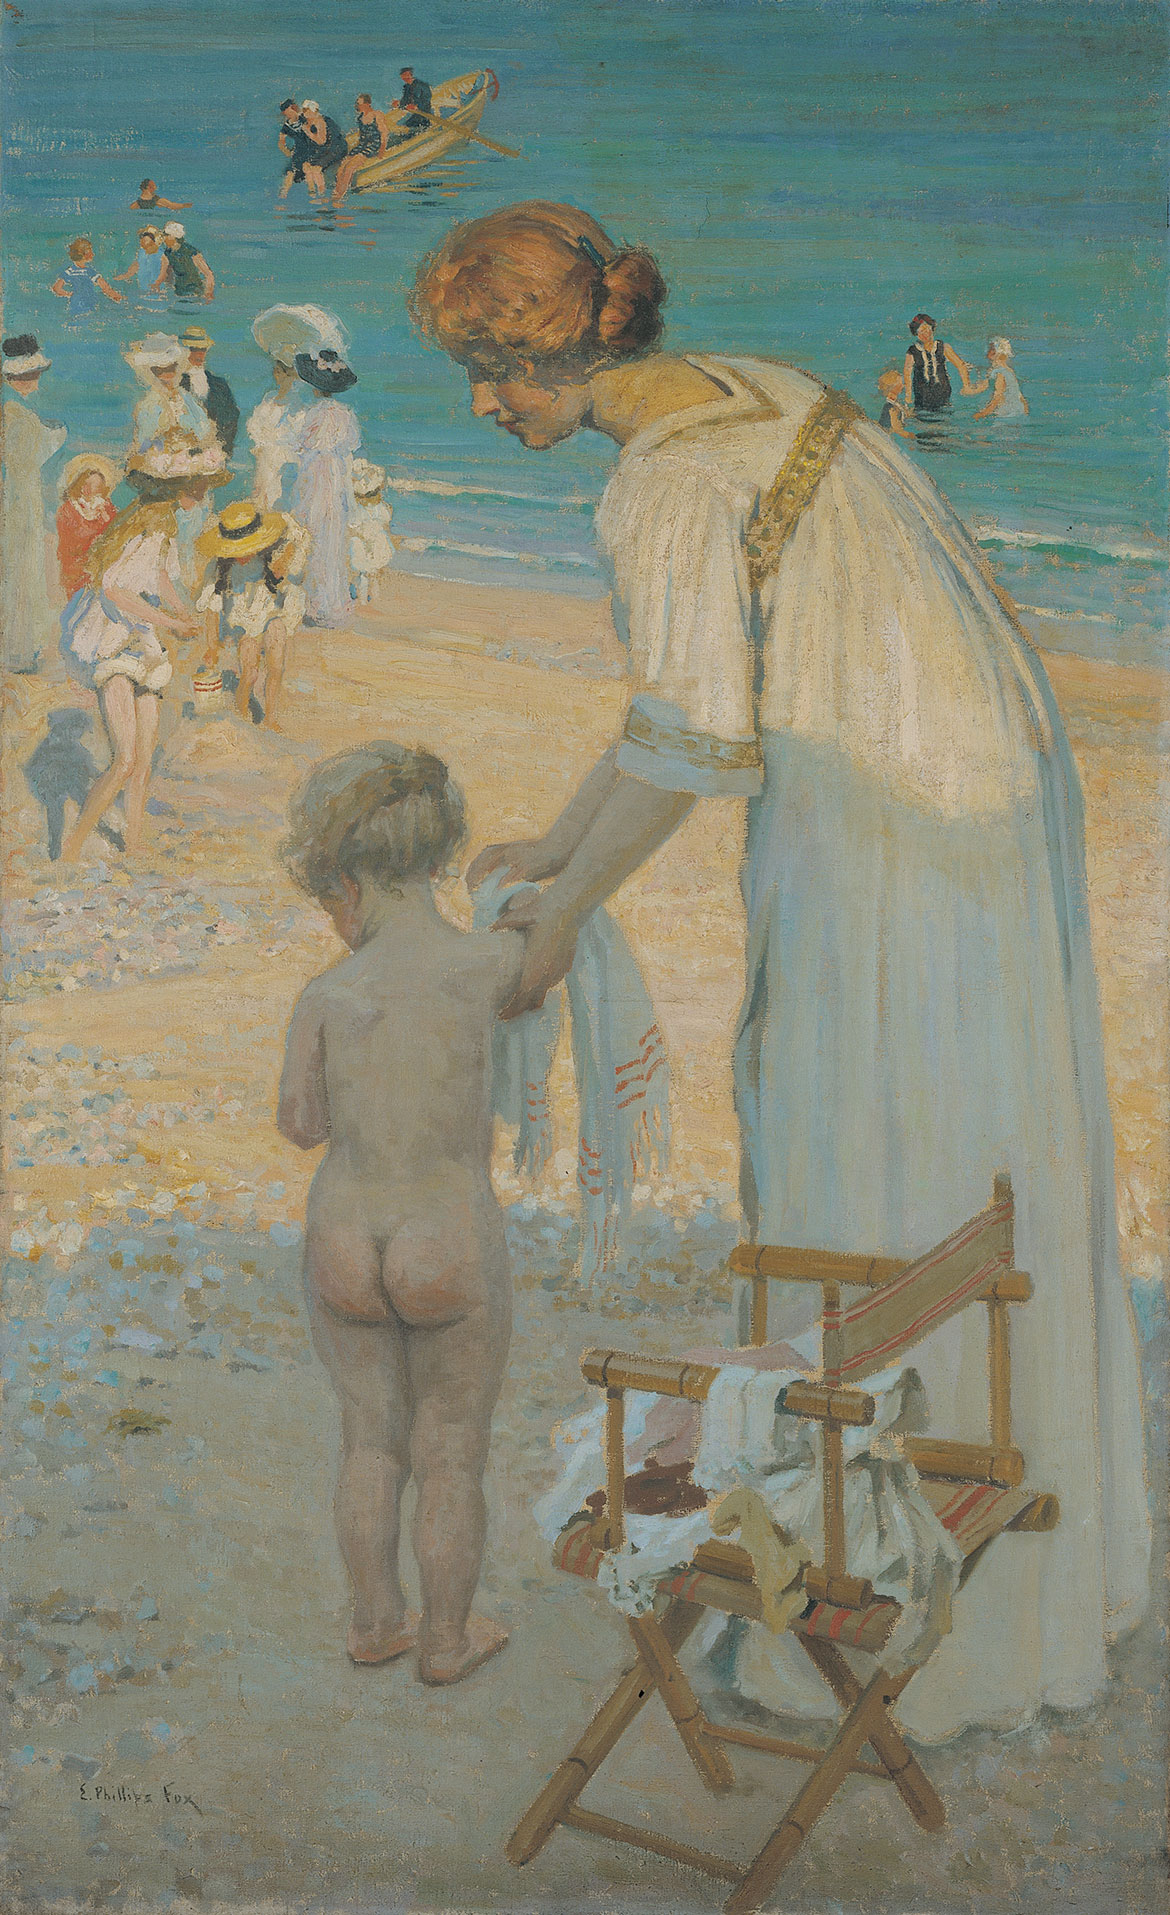 Mother, child & fashionable beach culture